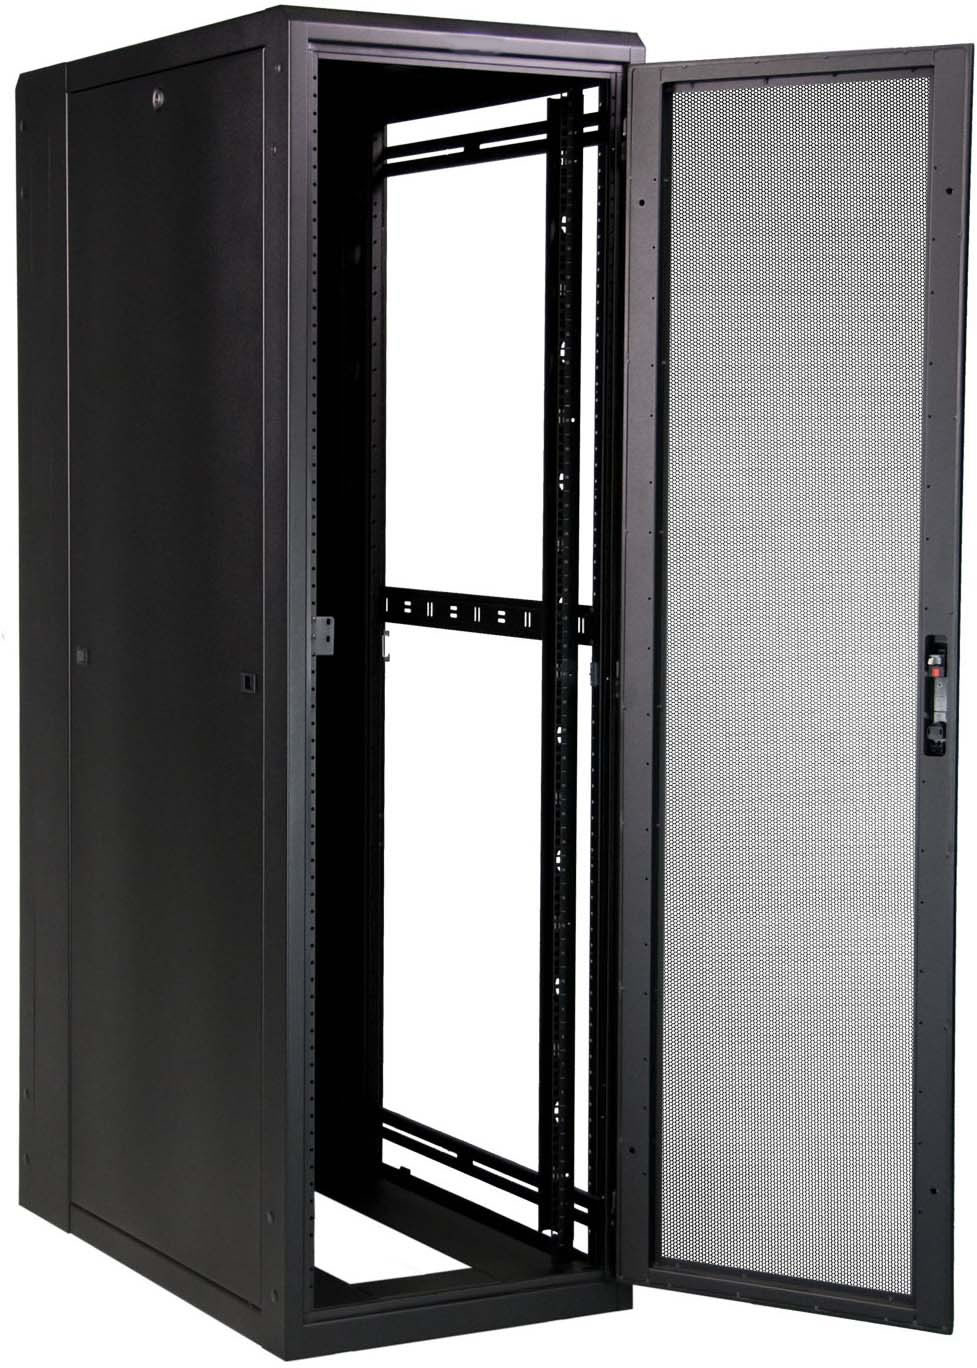 GS 27U 800mm Deep Server Rack / Cabinet with Perforated Front & Back Doors